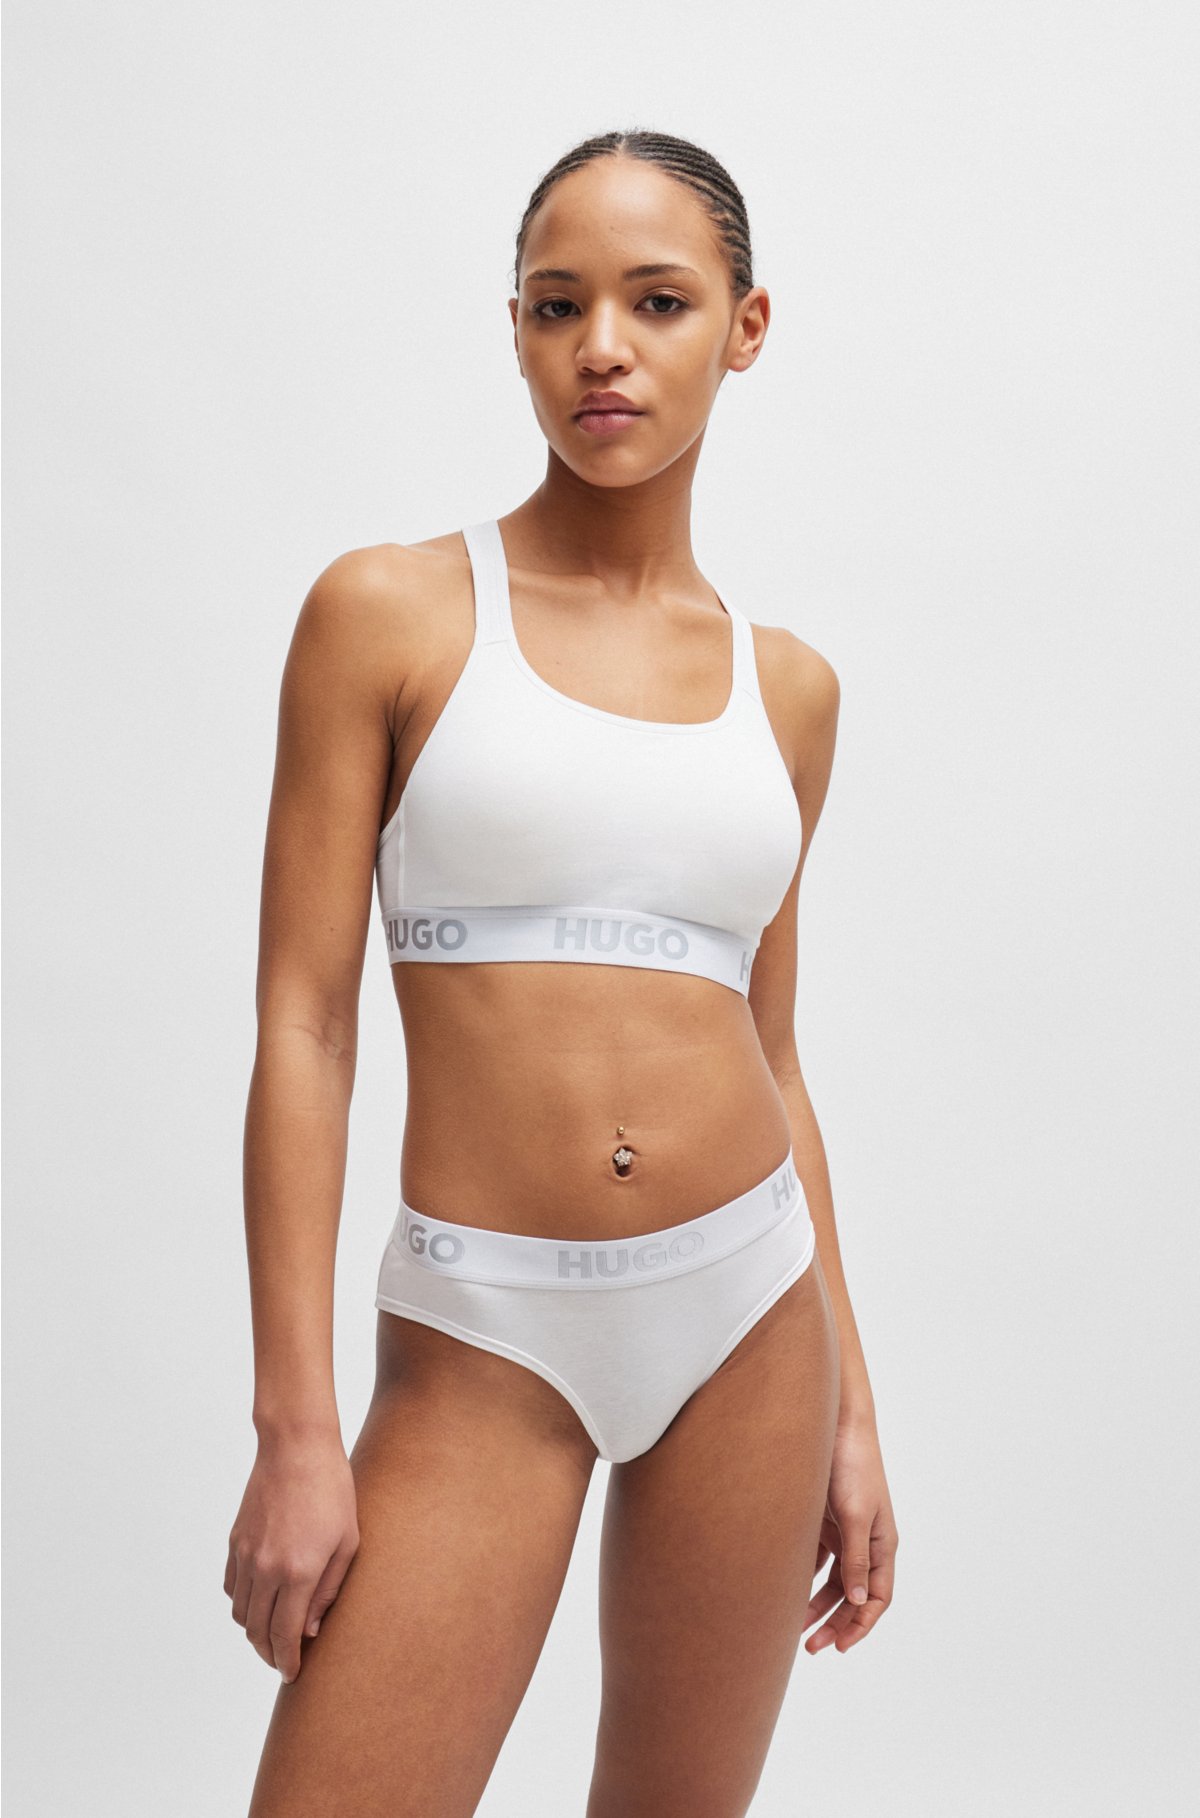 HUGO - cotton stretch logos bra Sports repeat in with